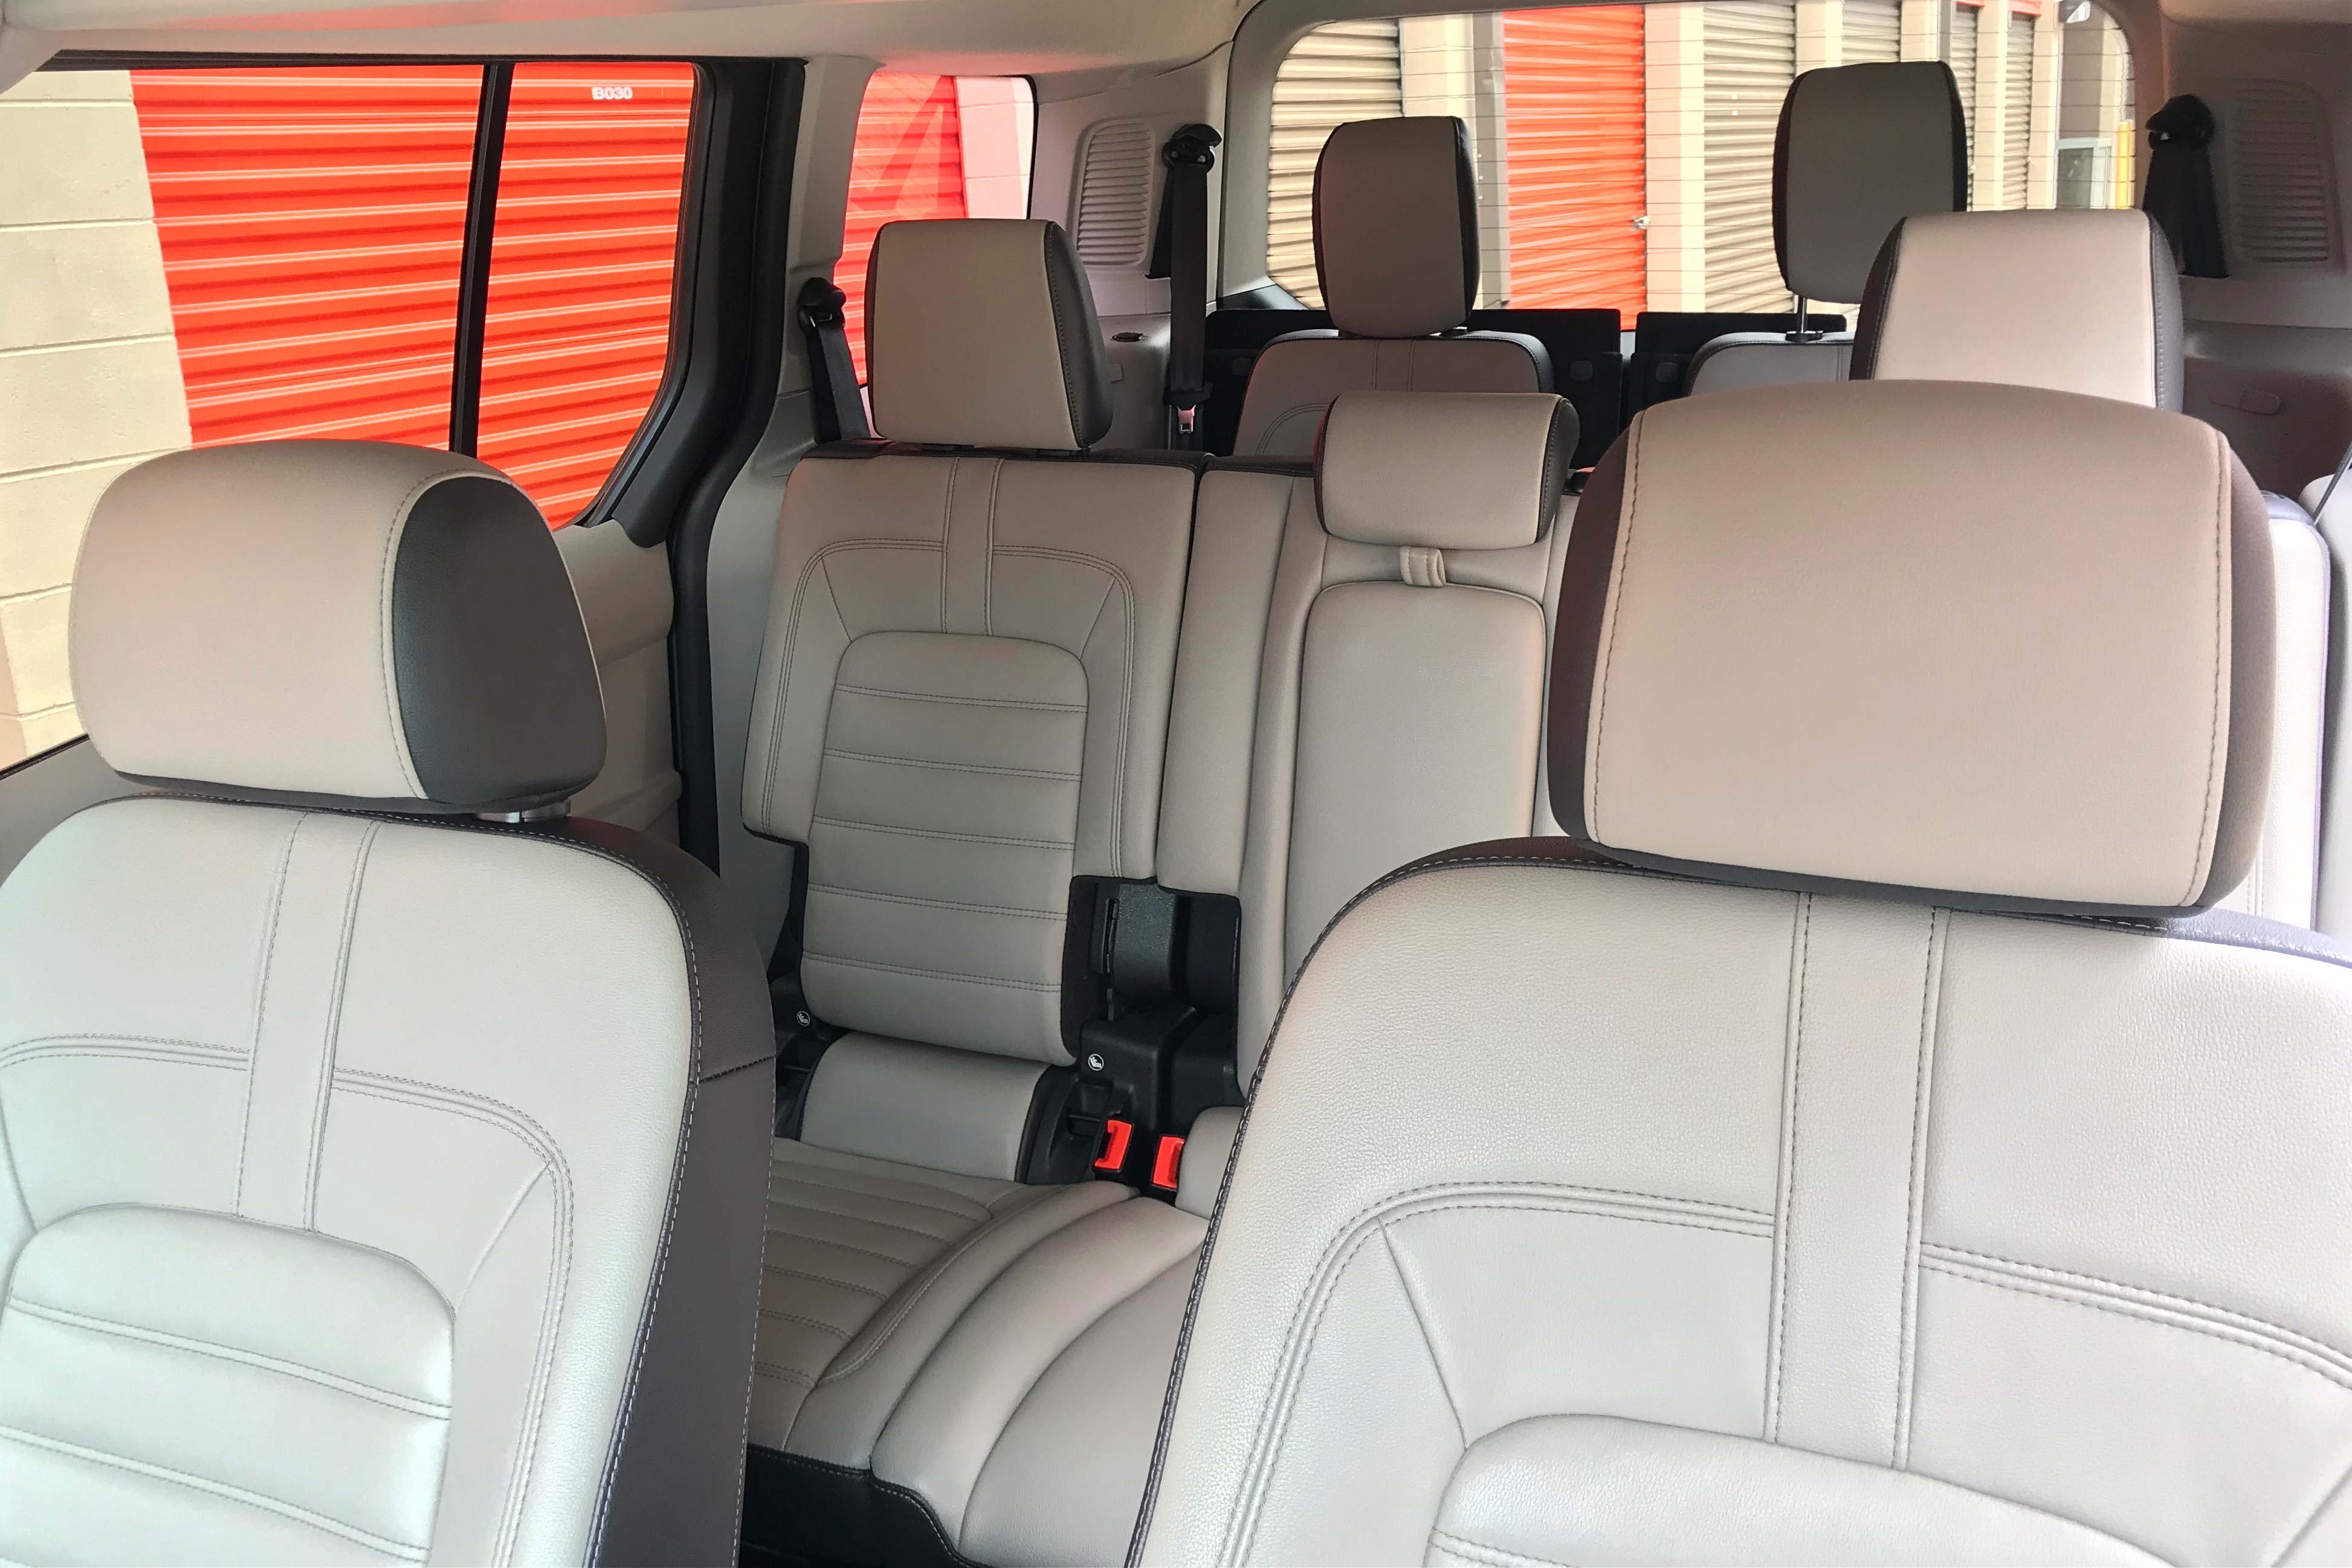 2019 Ford Transit Connect Helps Take Business Ventures to the Next